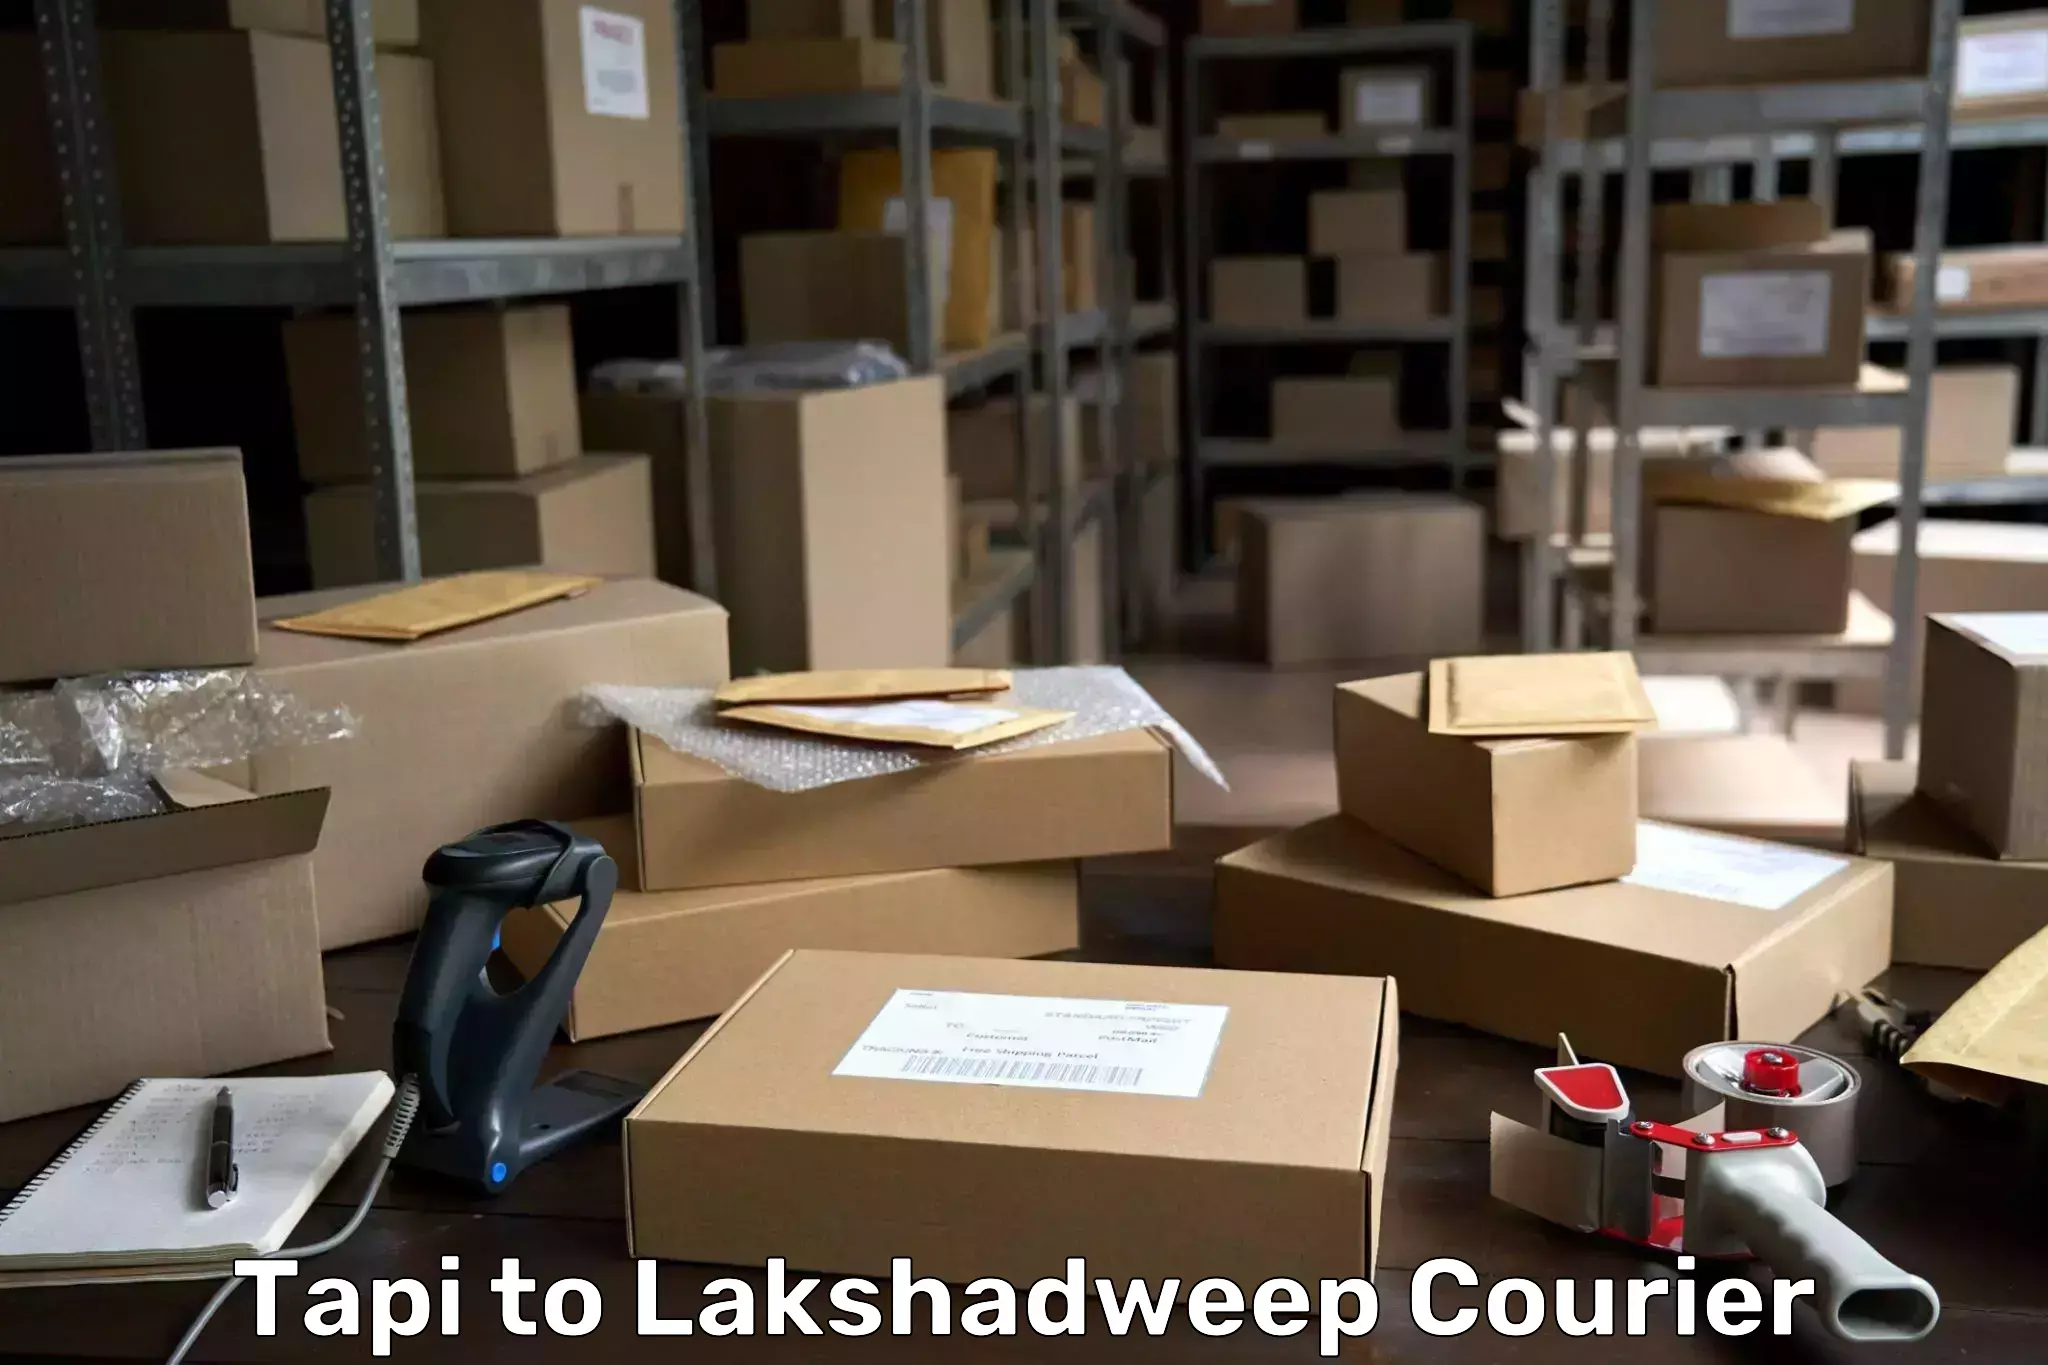 Multi-service courier options Tapi to Lakshadweep